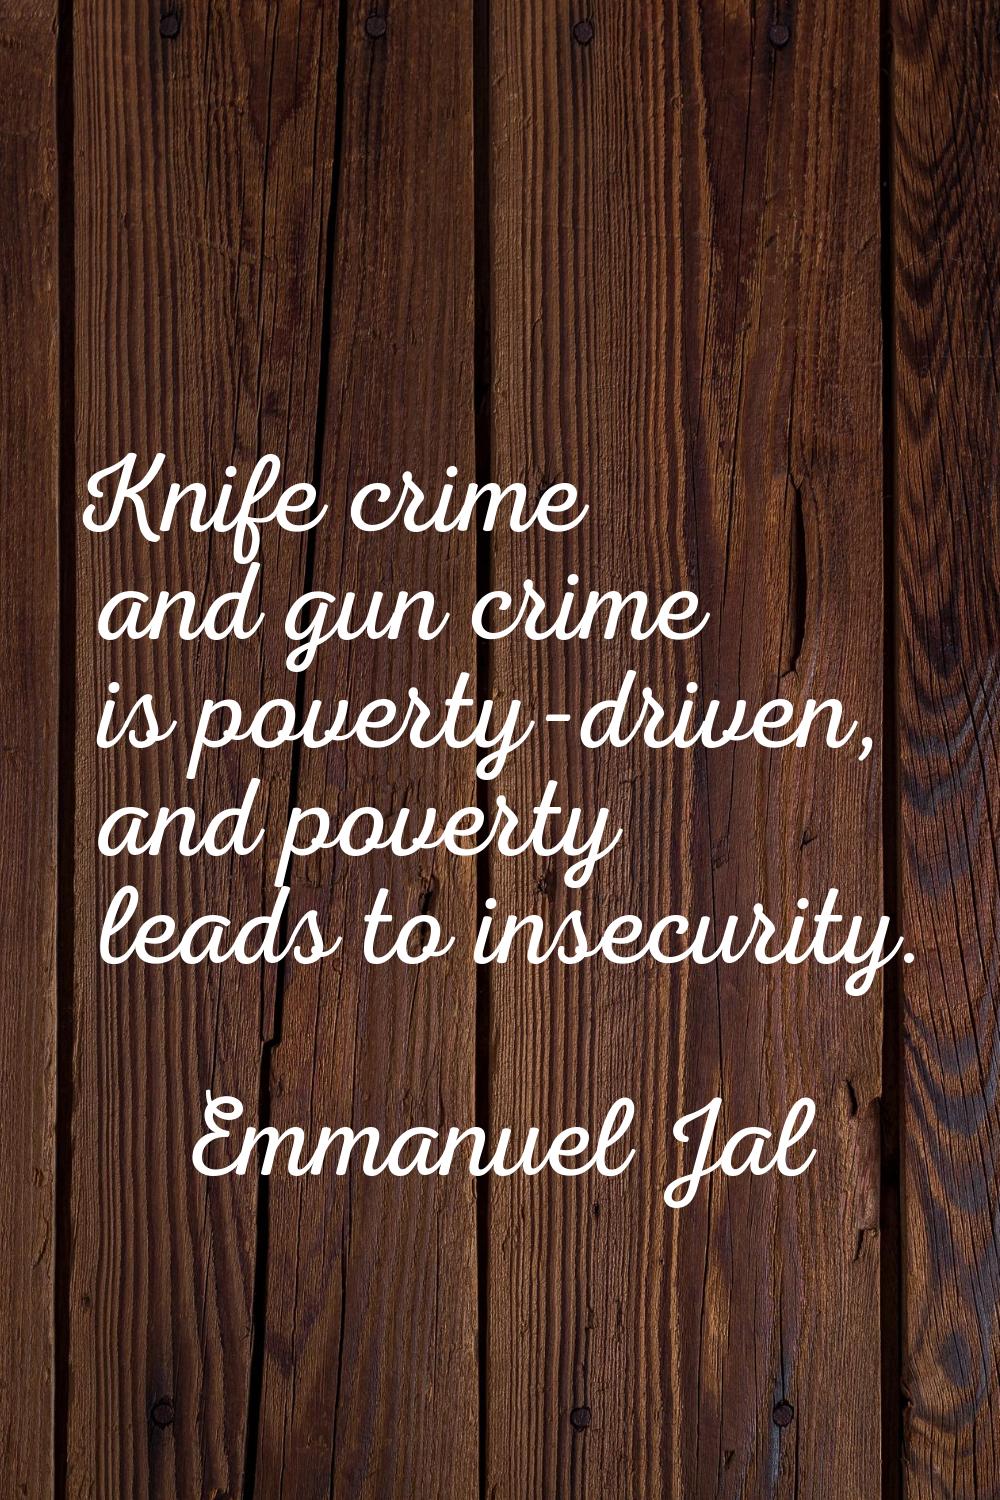 Knife crime and gun crime is poverty-driven, and poverty leads to insecurity.